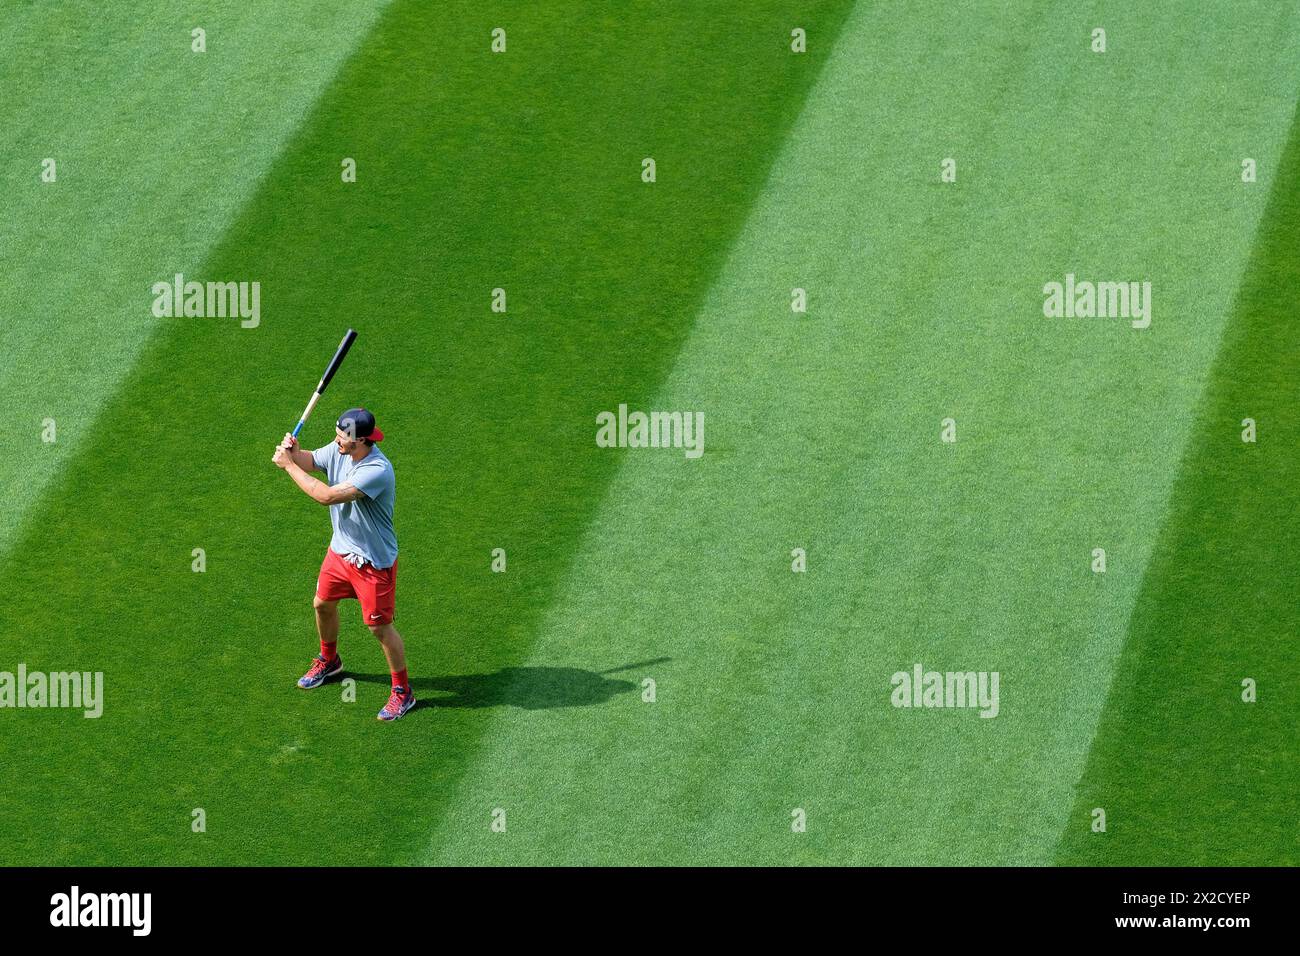 Professional major league baseball player warming up before a game; swinging the bat and practicing a batting stance in preparation for the game. Stock Photo